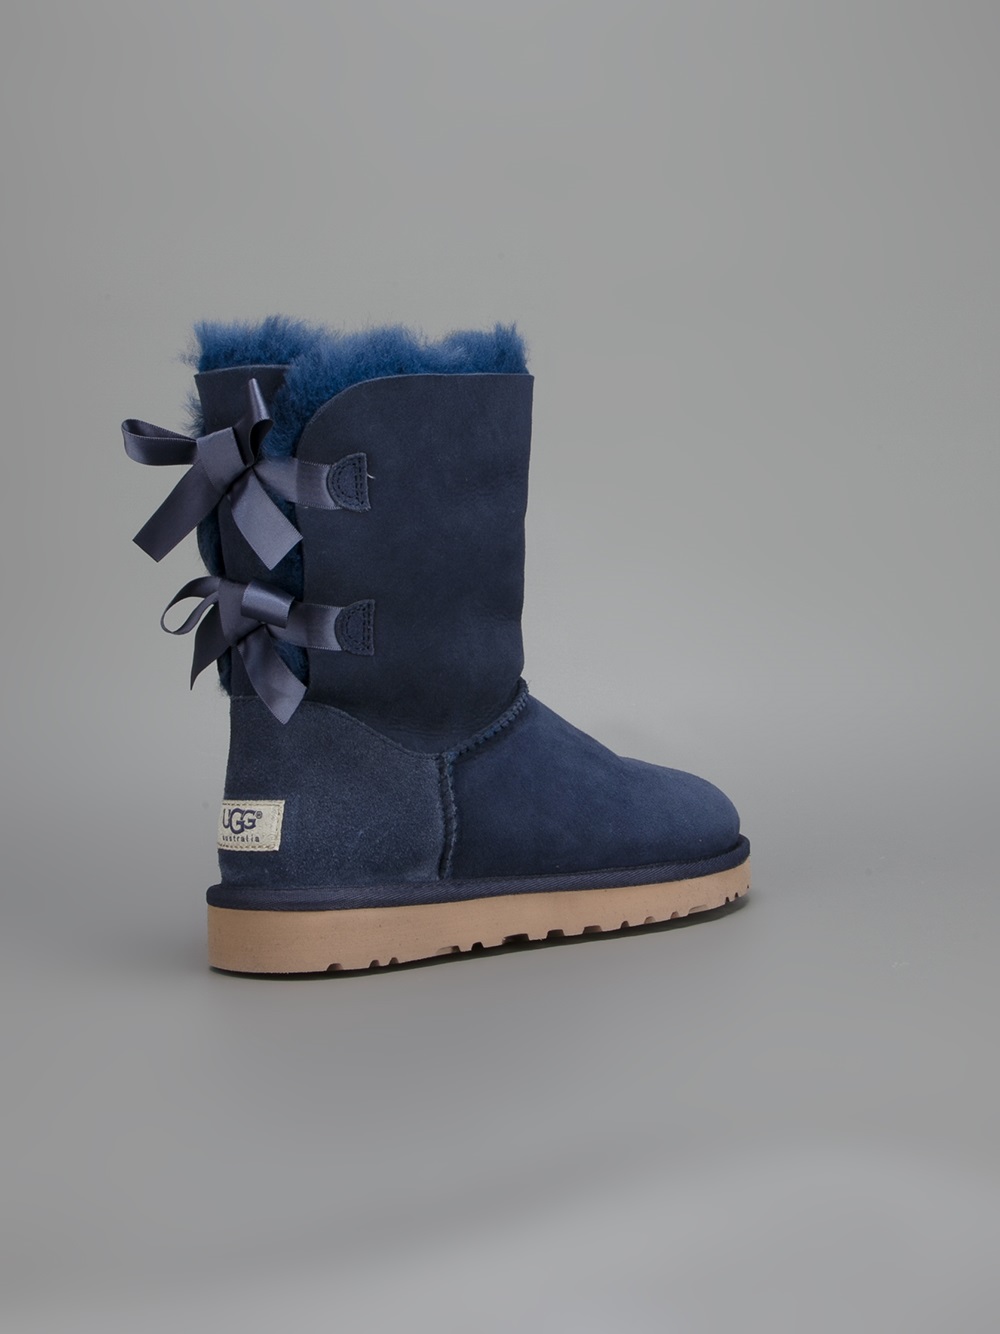 Lyst - Ugg Bailey Bow Boot in Blue